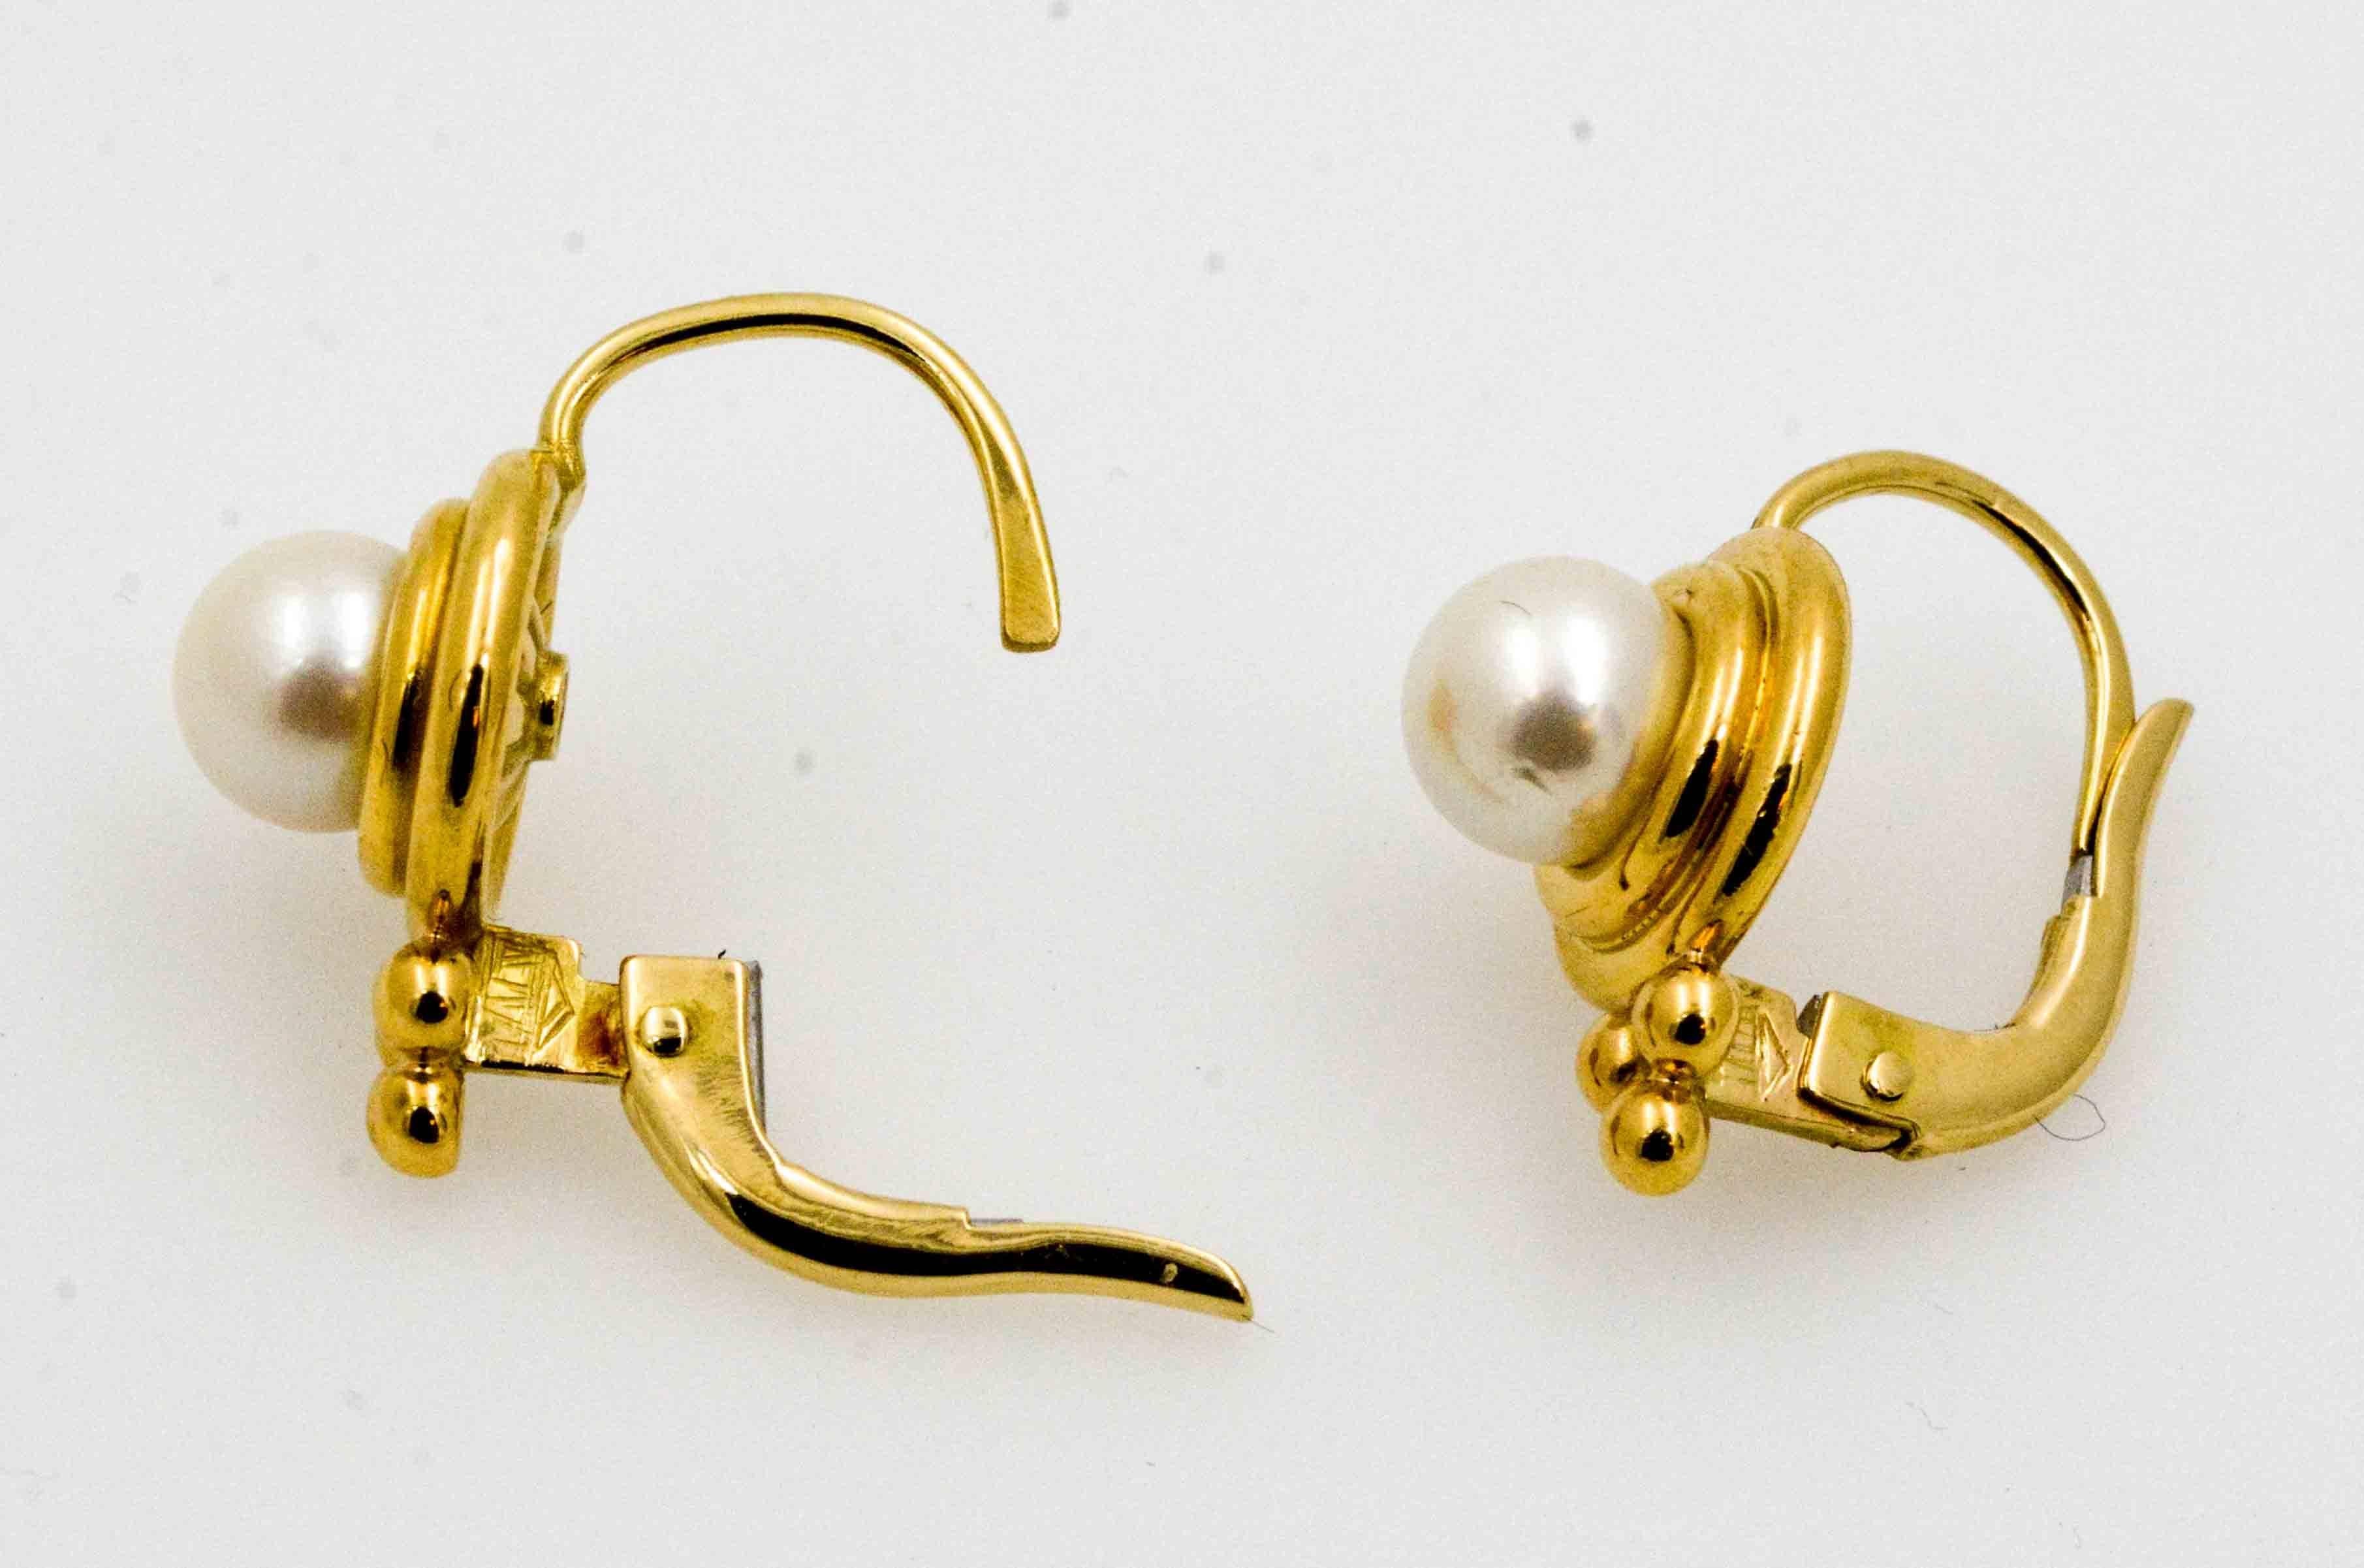 18 karat gold surrounds white cultured pearls in these classy Temple St. Clair lever back earrings. Crafted in Italy in 18 karat yellow gold, and set with beautiful white cultured pearls. These elegant earrings are ready for daytime or evening